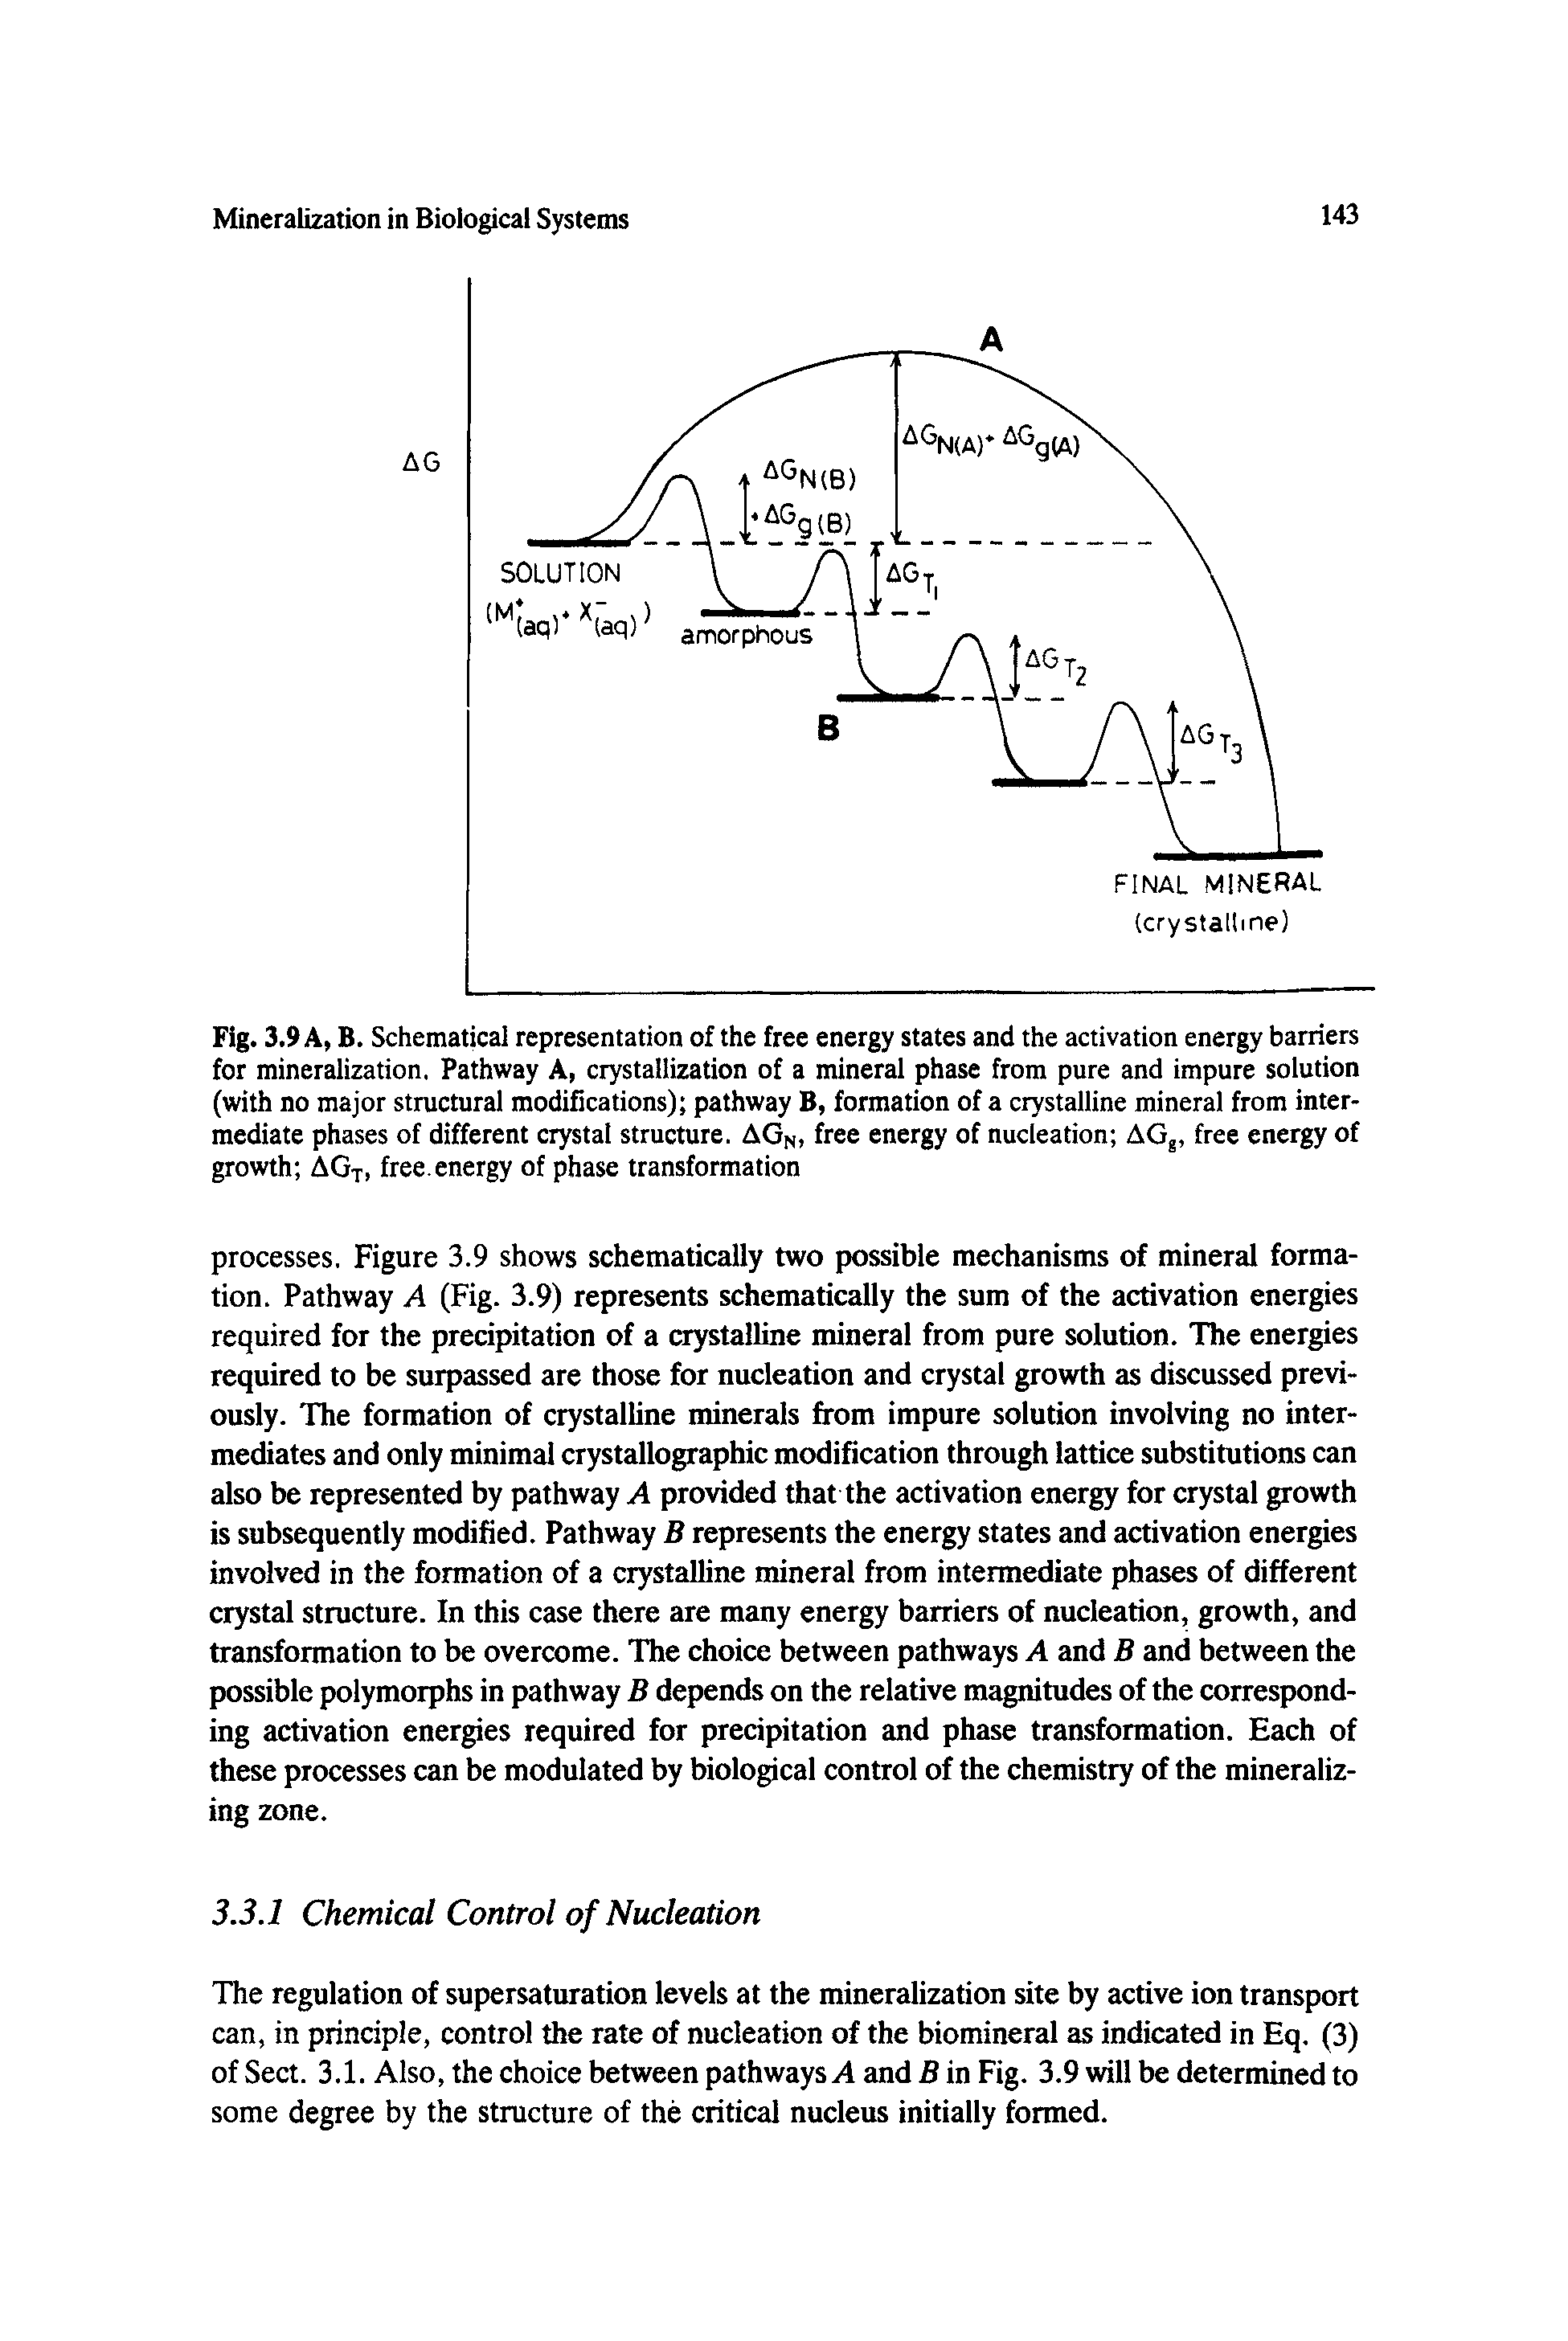 Fig. 3.9 A, B. Schematieai representation of the free energy states and the activation energy barriers for mineralization. Pathway A, crystallization of a mineral phase from pure and impure solution (with no major structural modifications) pathway B, formation of a crystalline mineral from intermediate phases of different crystal structure. AGn, free energy of nucleation AGg, free energy of growth AGx, free, energy of phase transformation...